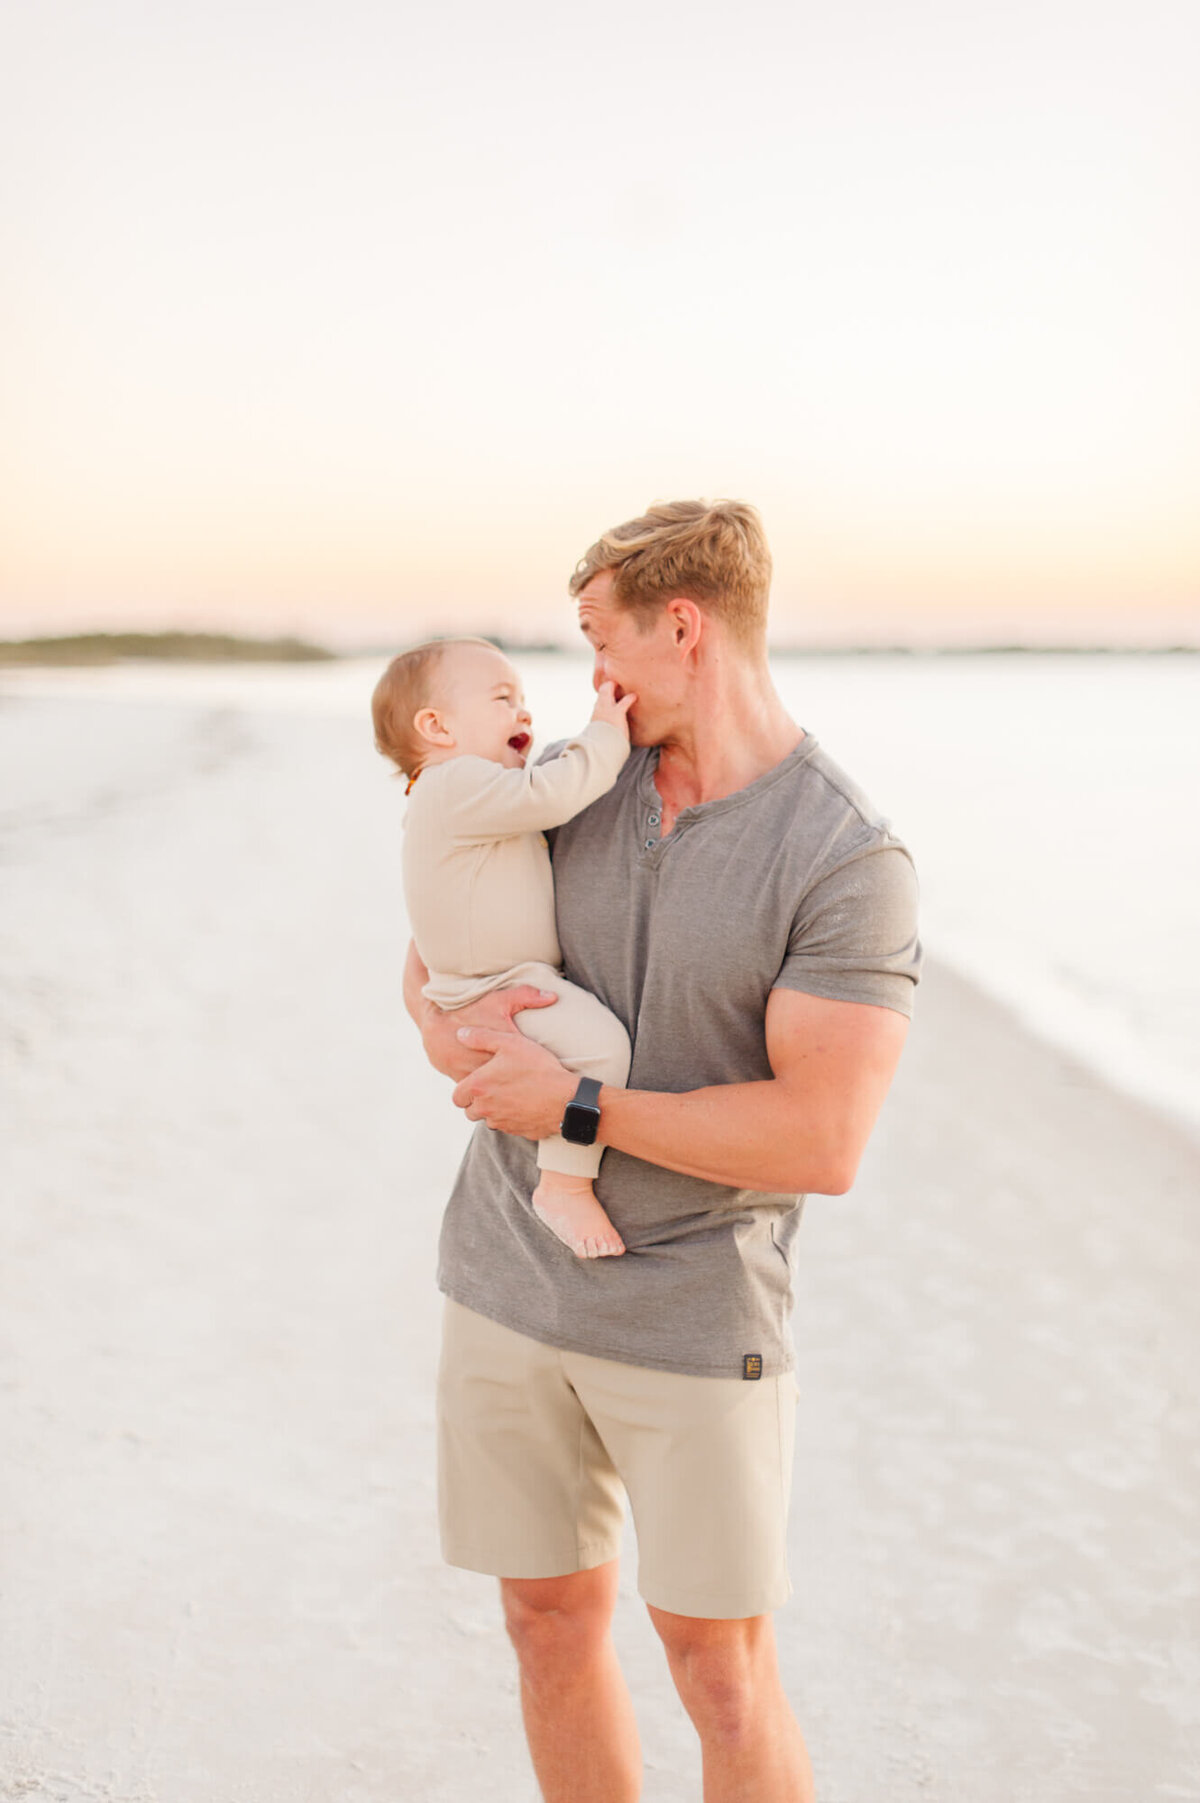 Son put his hands on dads mouth while they smile and laugh on the beach during their family portraits